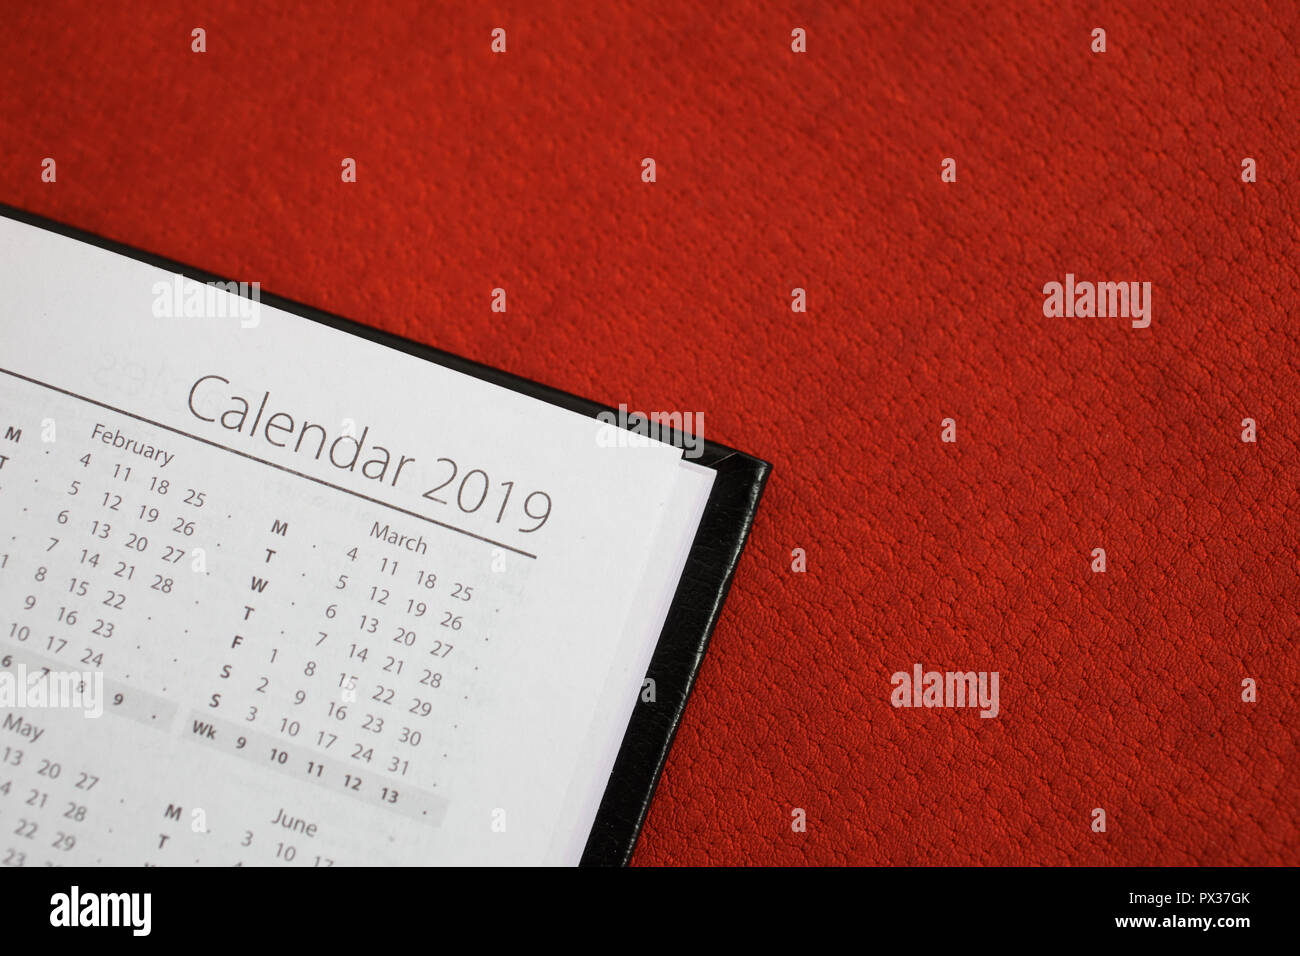 2019 Calendar on red leather Stock Photo